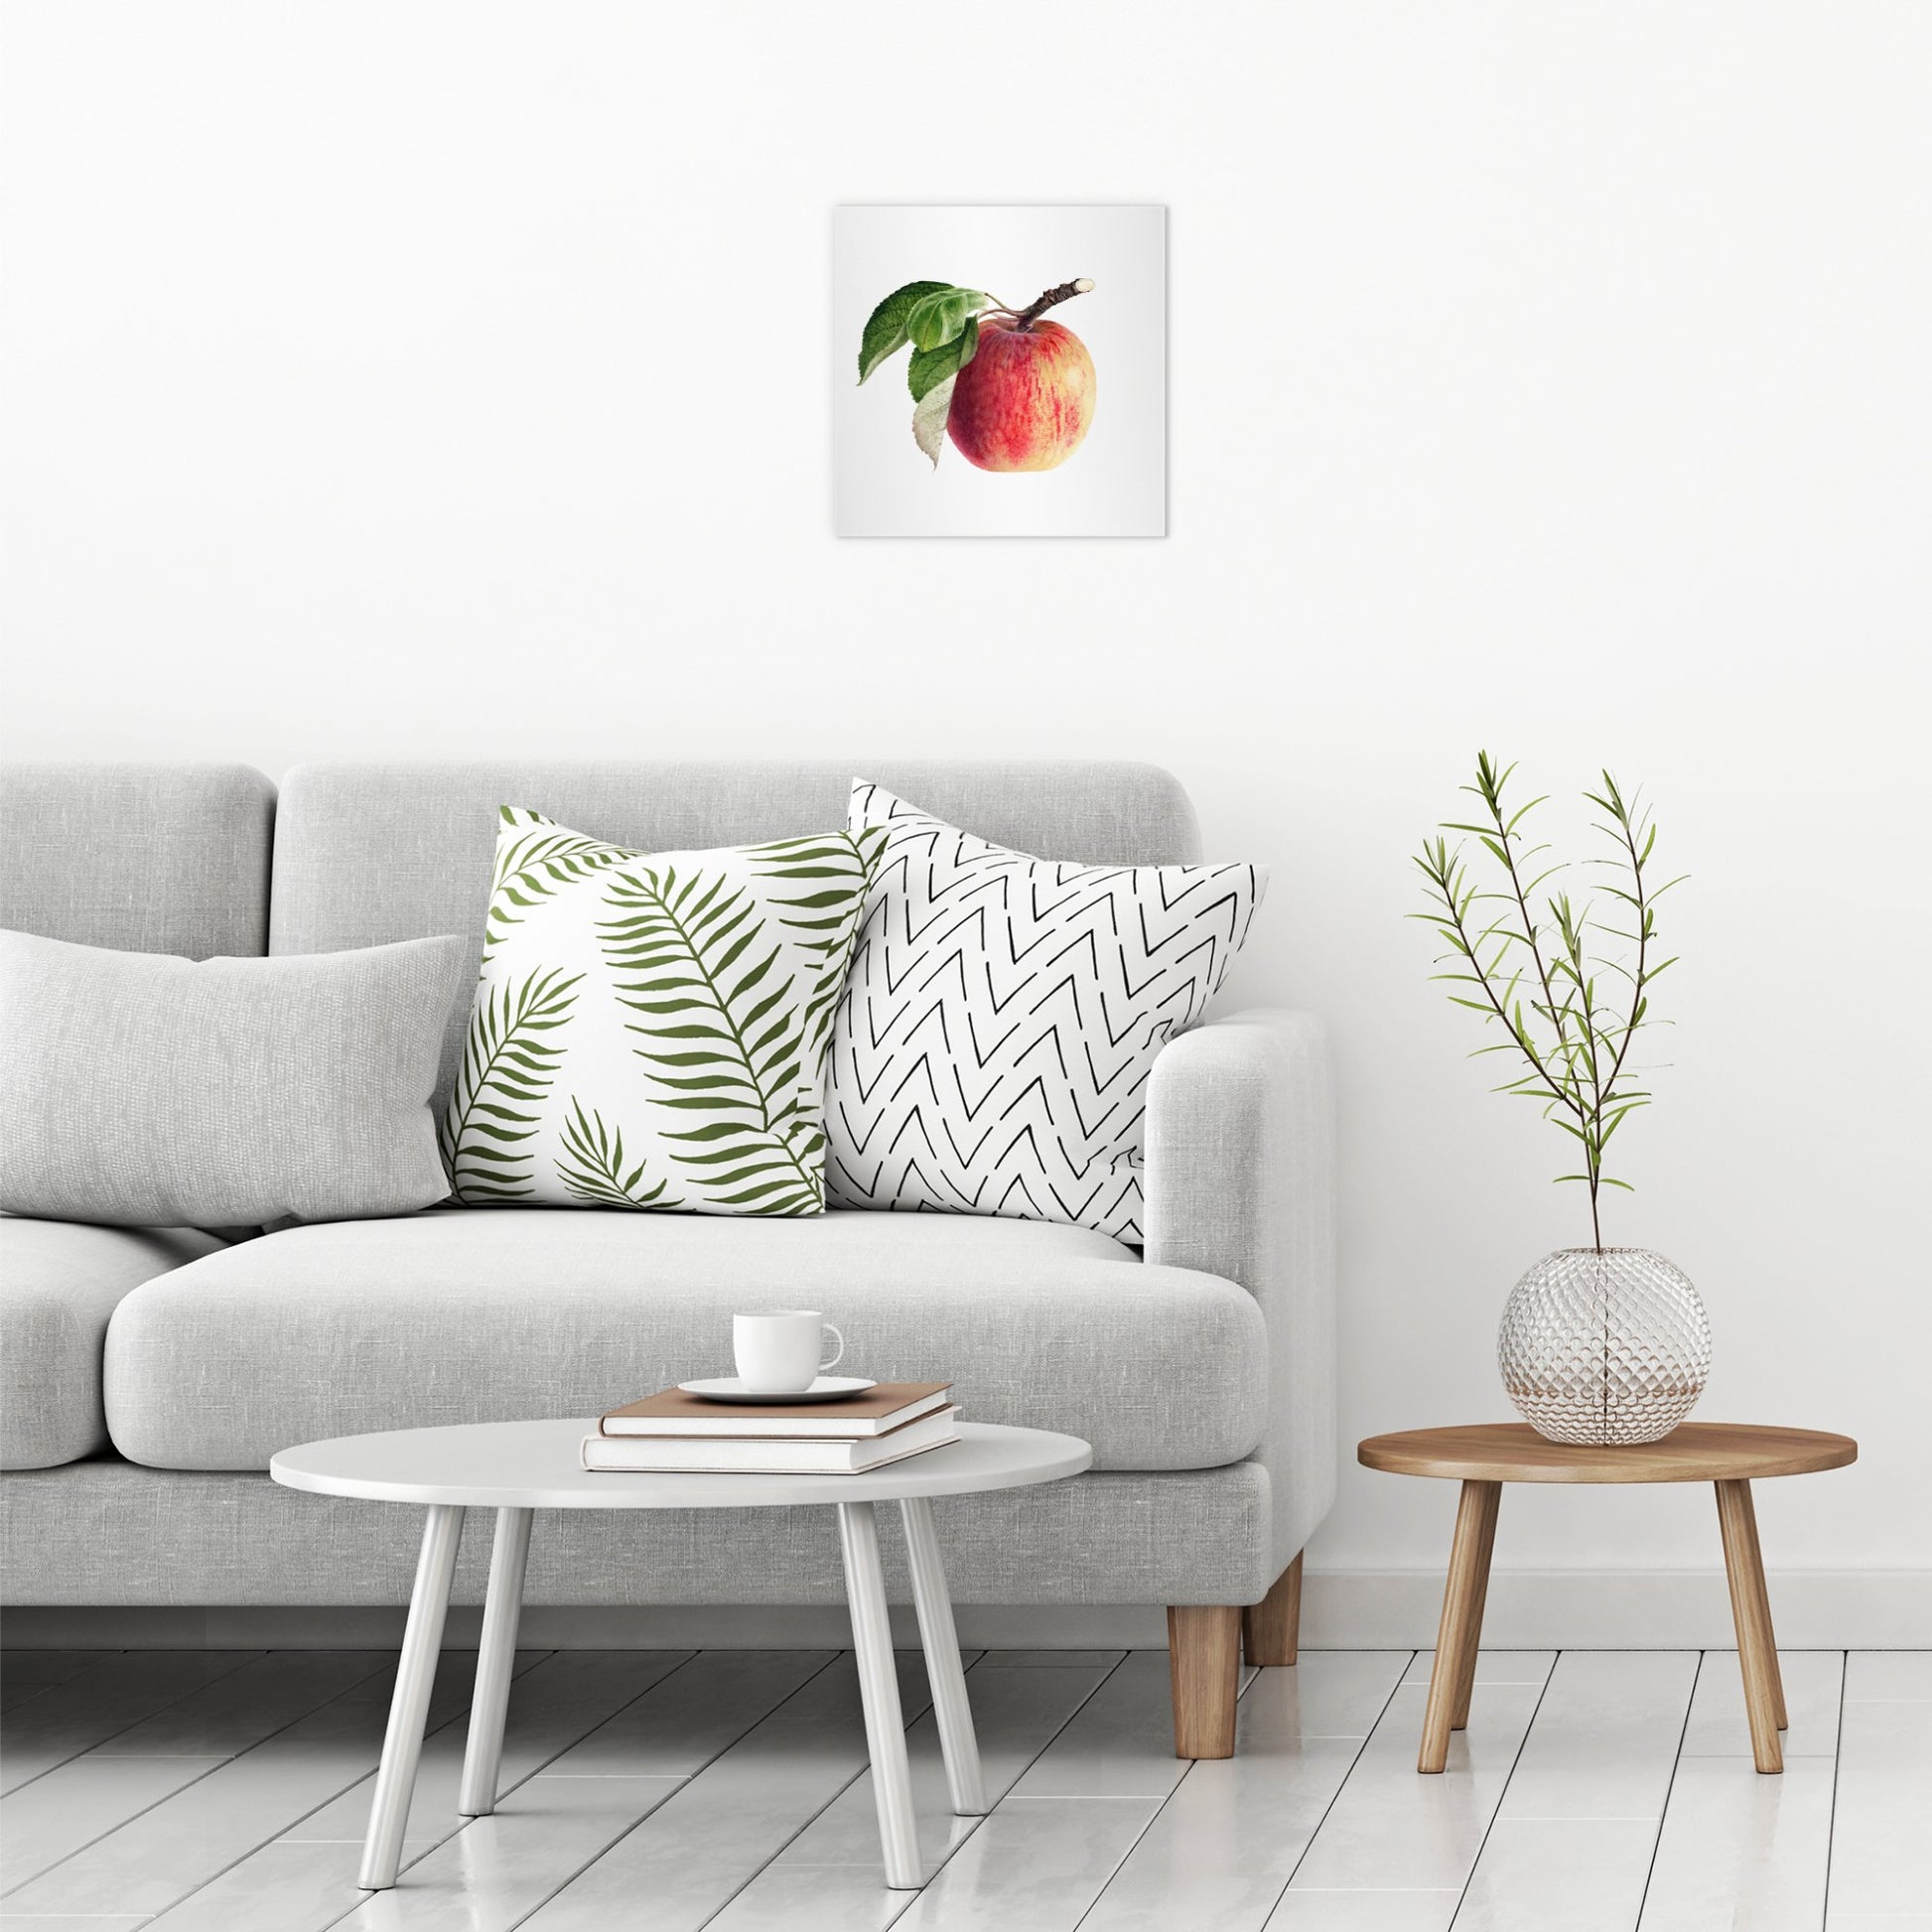 A contemporary modern room view showing a medium size metal art poster display plate with printed design of a Vintage Apple Illustration